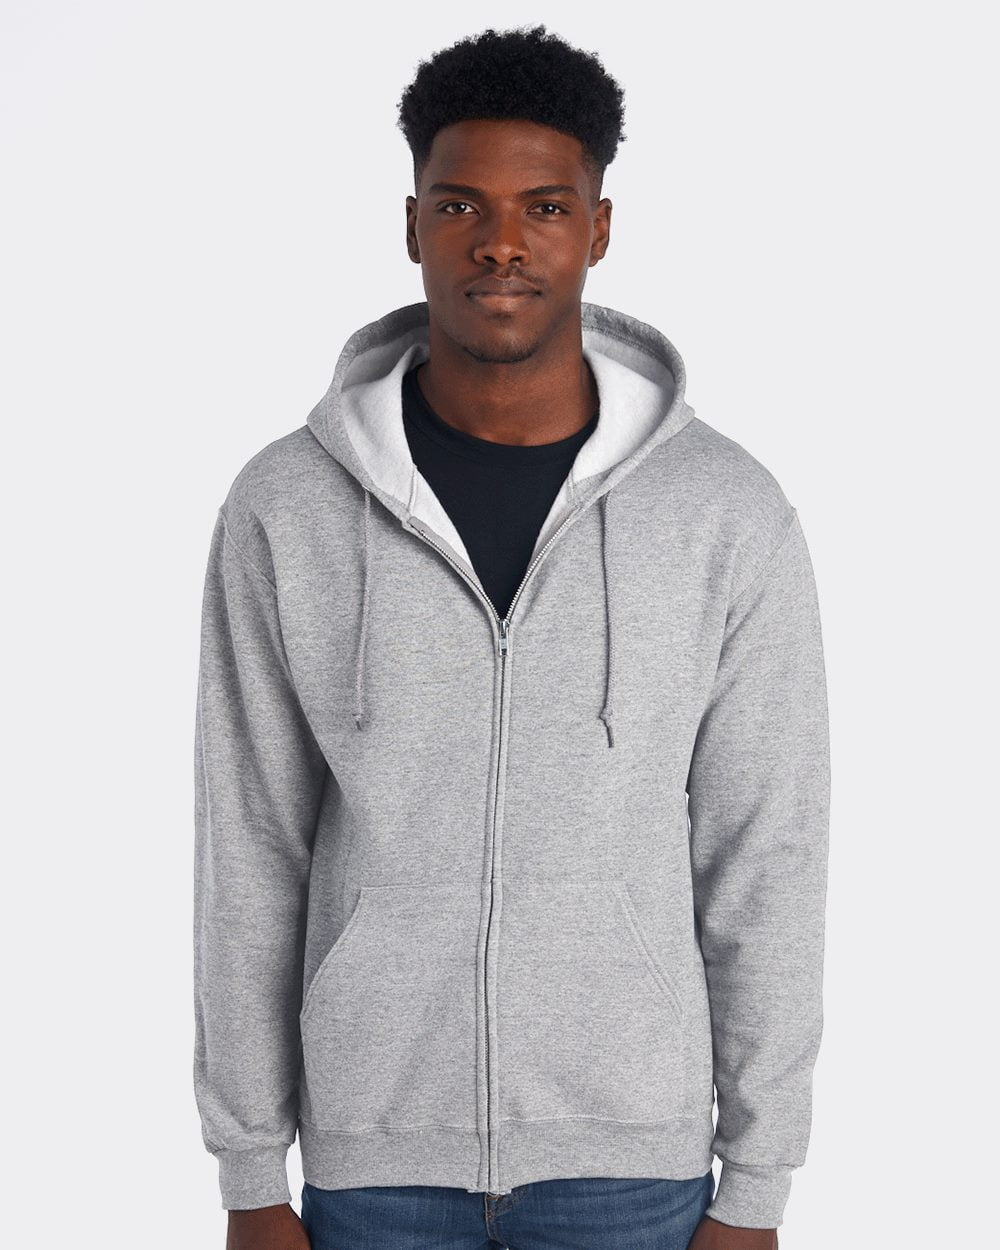 Custom Independent Trading Midweight Zip Up Hoodie Design, 58% OFF